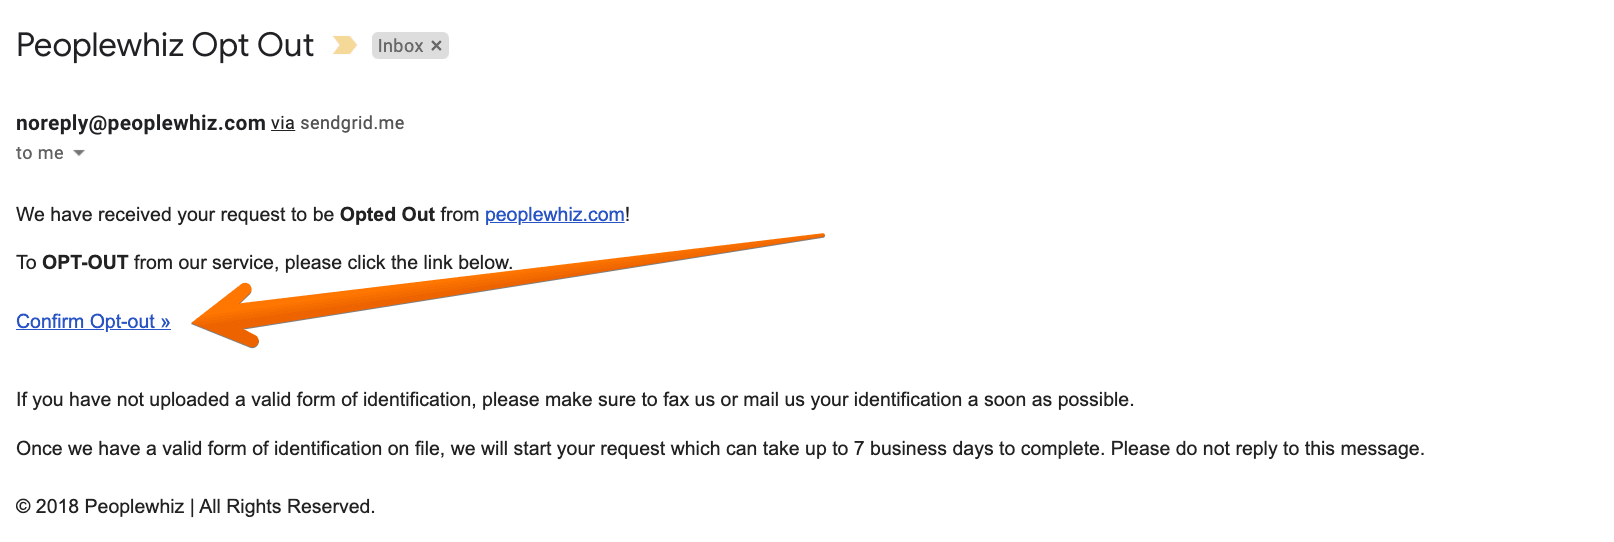 Check your inbox to find a verification email from PeopleWhiz.net and click on the "Confirm Opt-out" link to verify your removal request